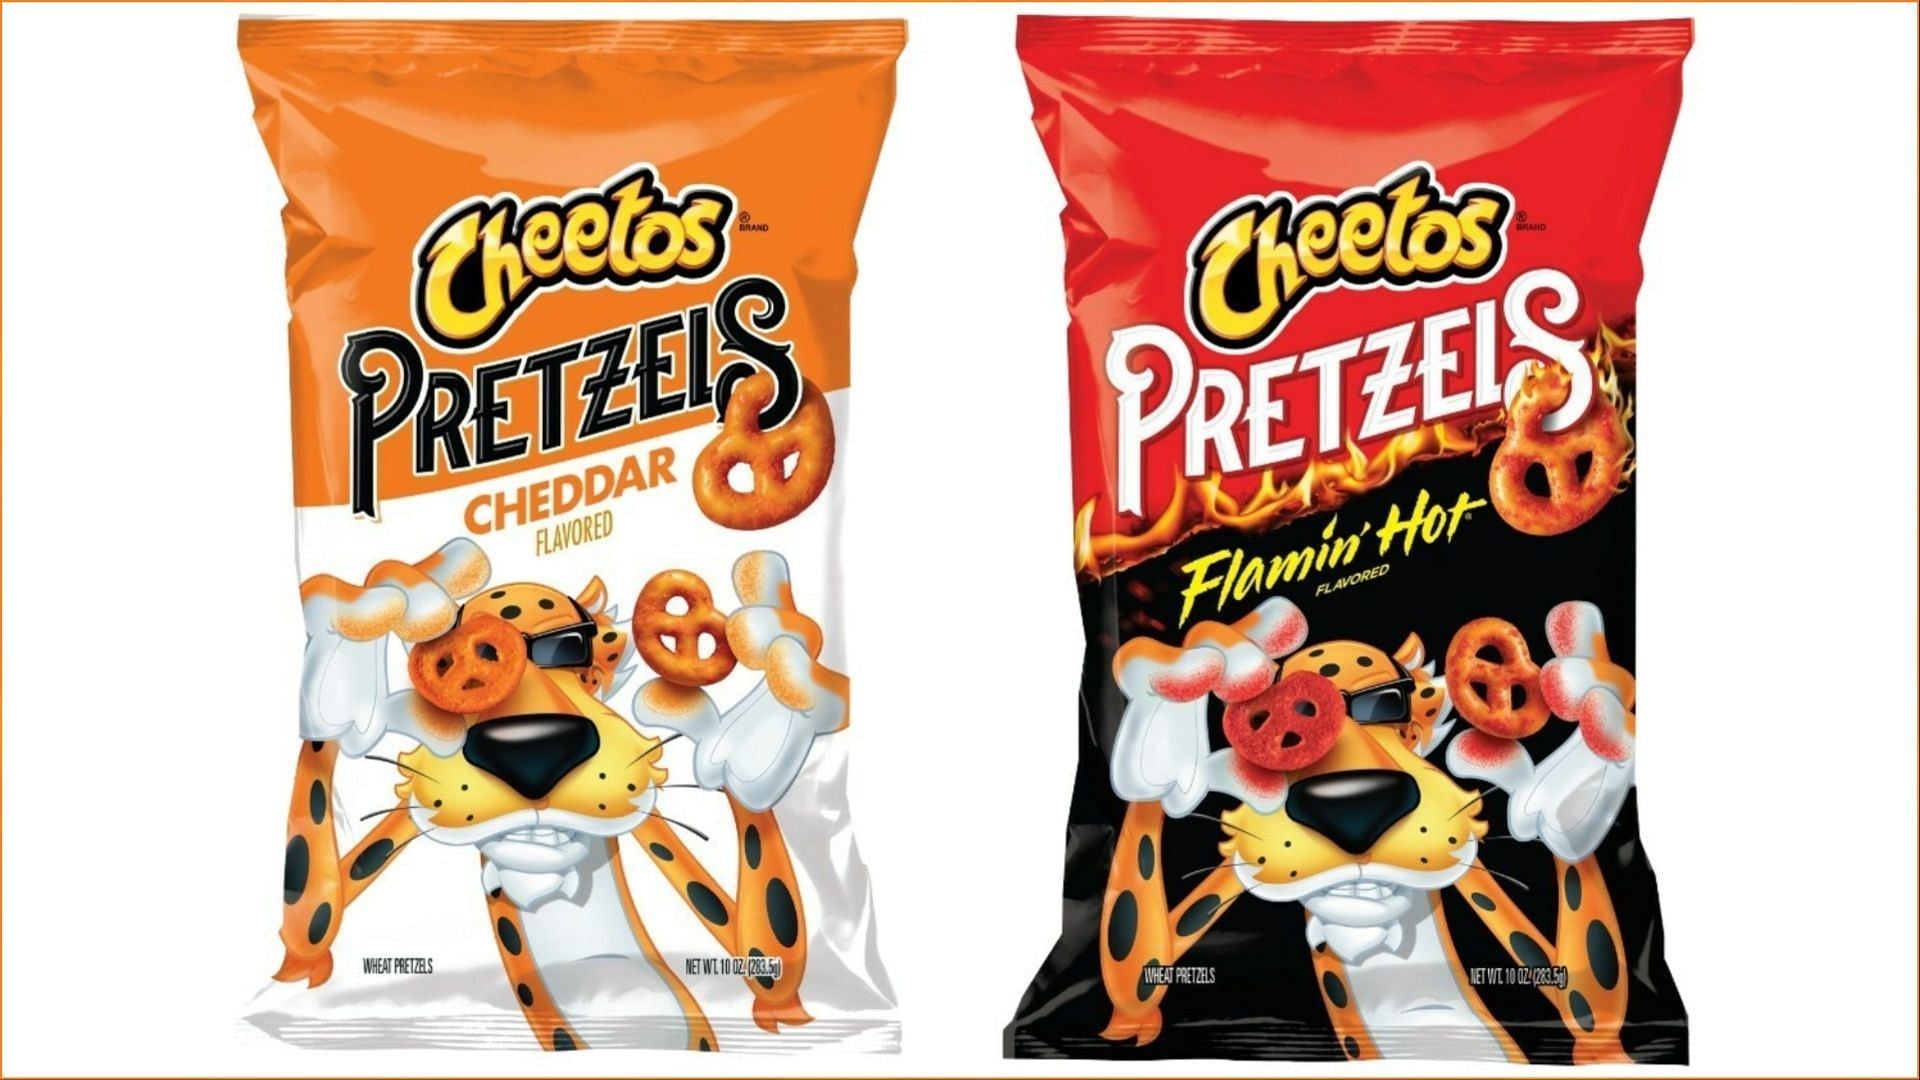 Cheetos Pretzels are available in stores nationwide starting October 19 (Image via Cheetos)